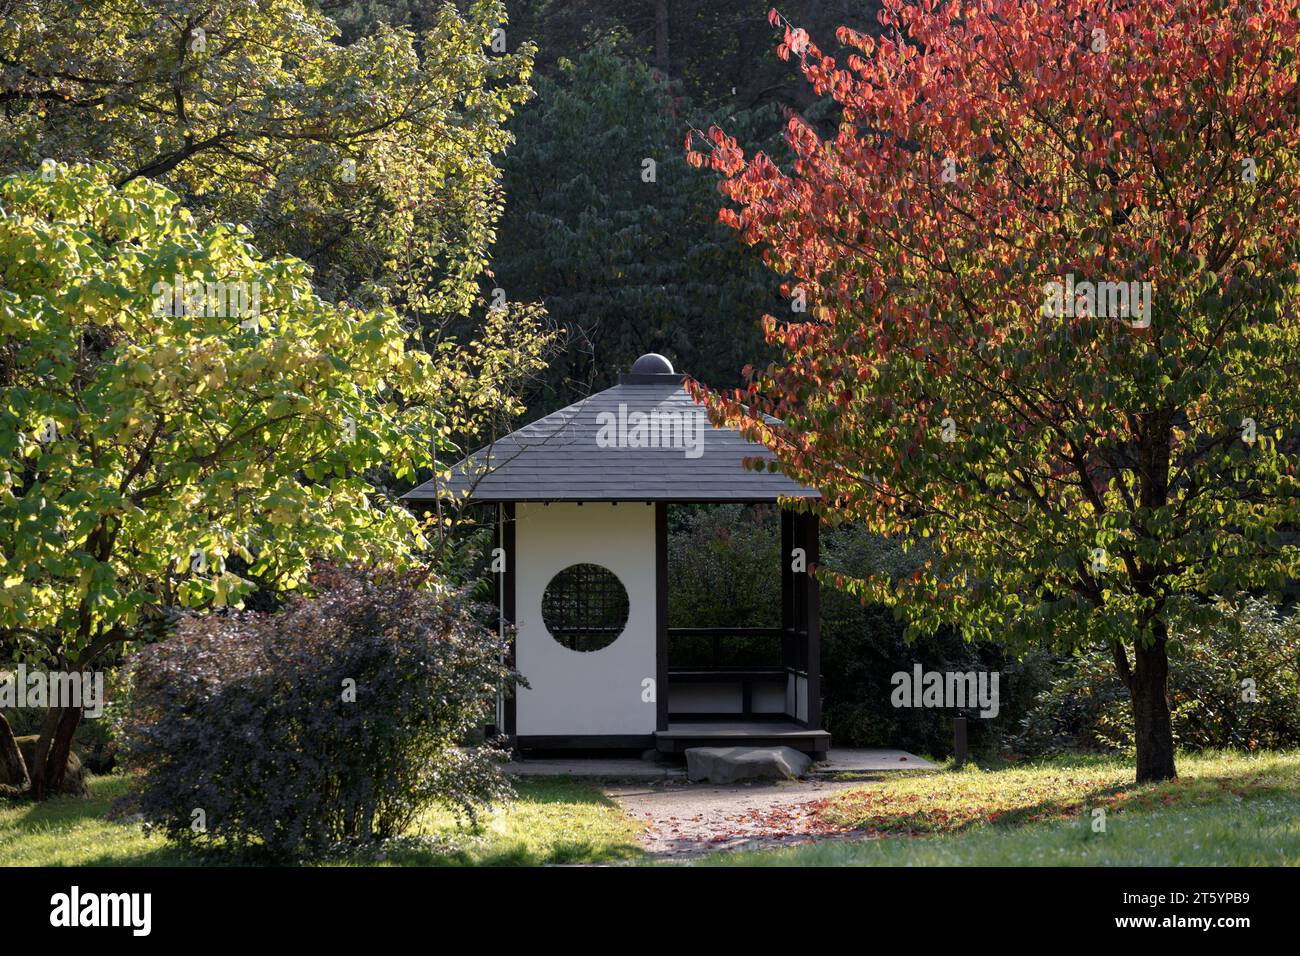 Japanese traditional tea house with a growing sakura tree and colorful foliage on an autumn day in a Japanese garden. Main Botanical Garden of the Rus Stock Photo